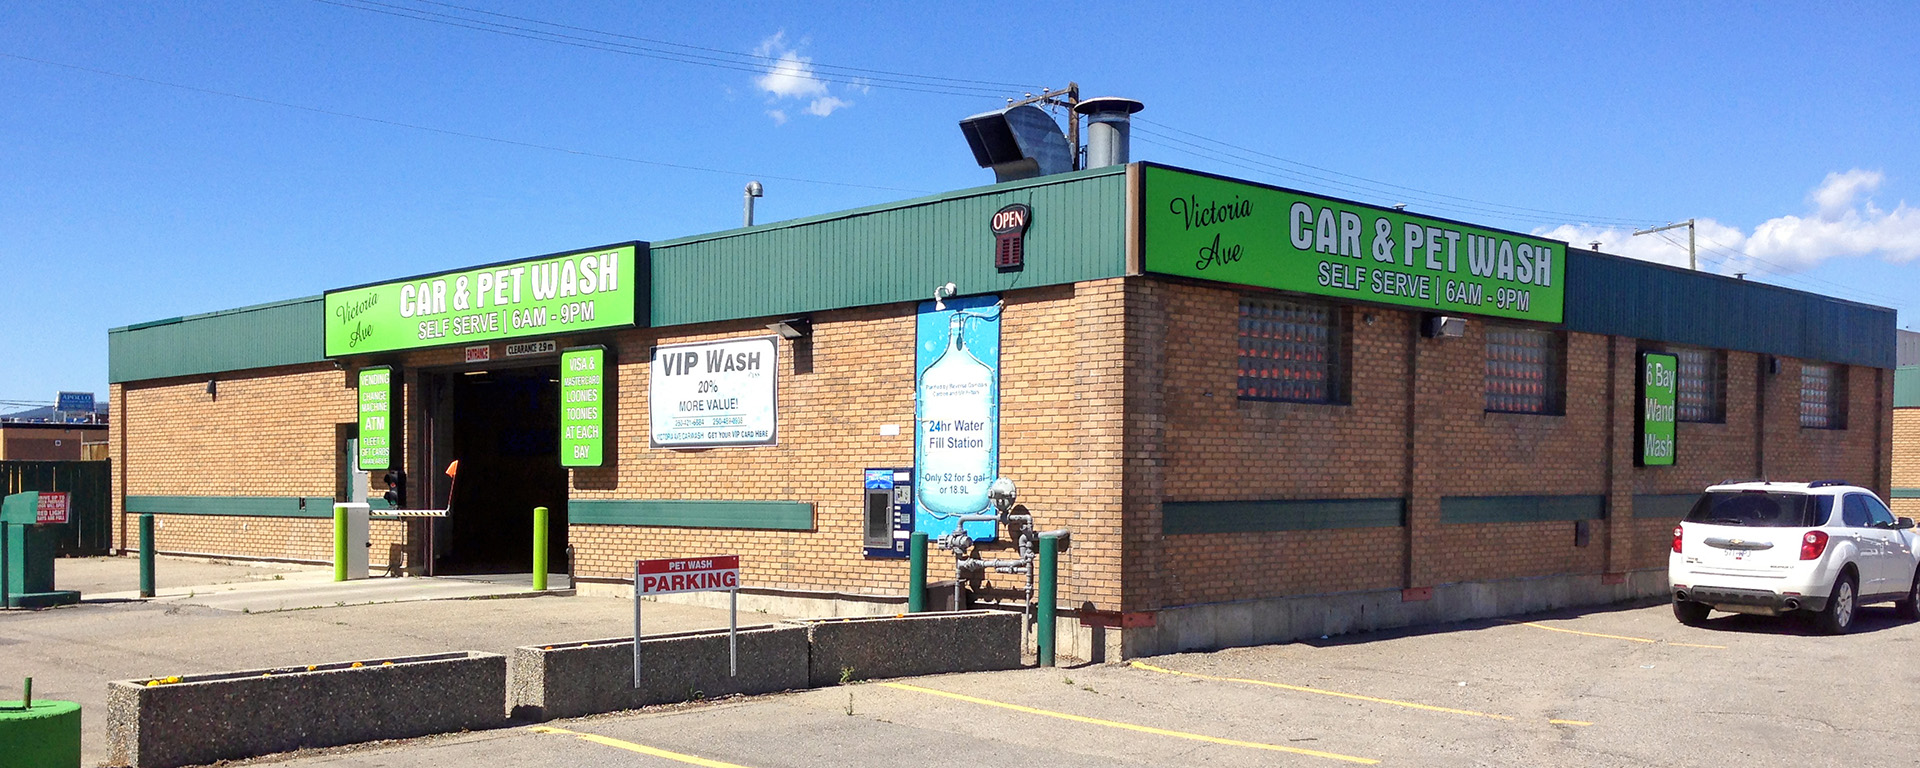 Exterior of Victoria Ave Car & Pet Wash in Cranbrook, with green signage and a large parking lot 